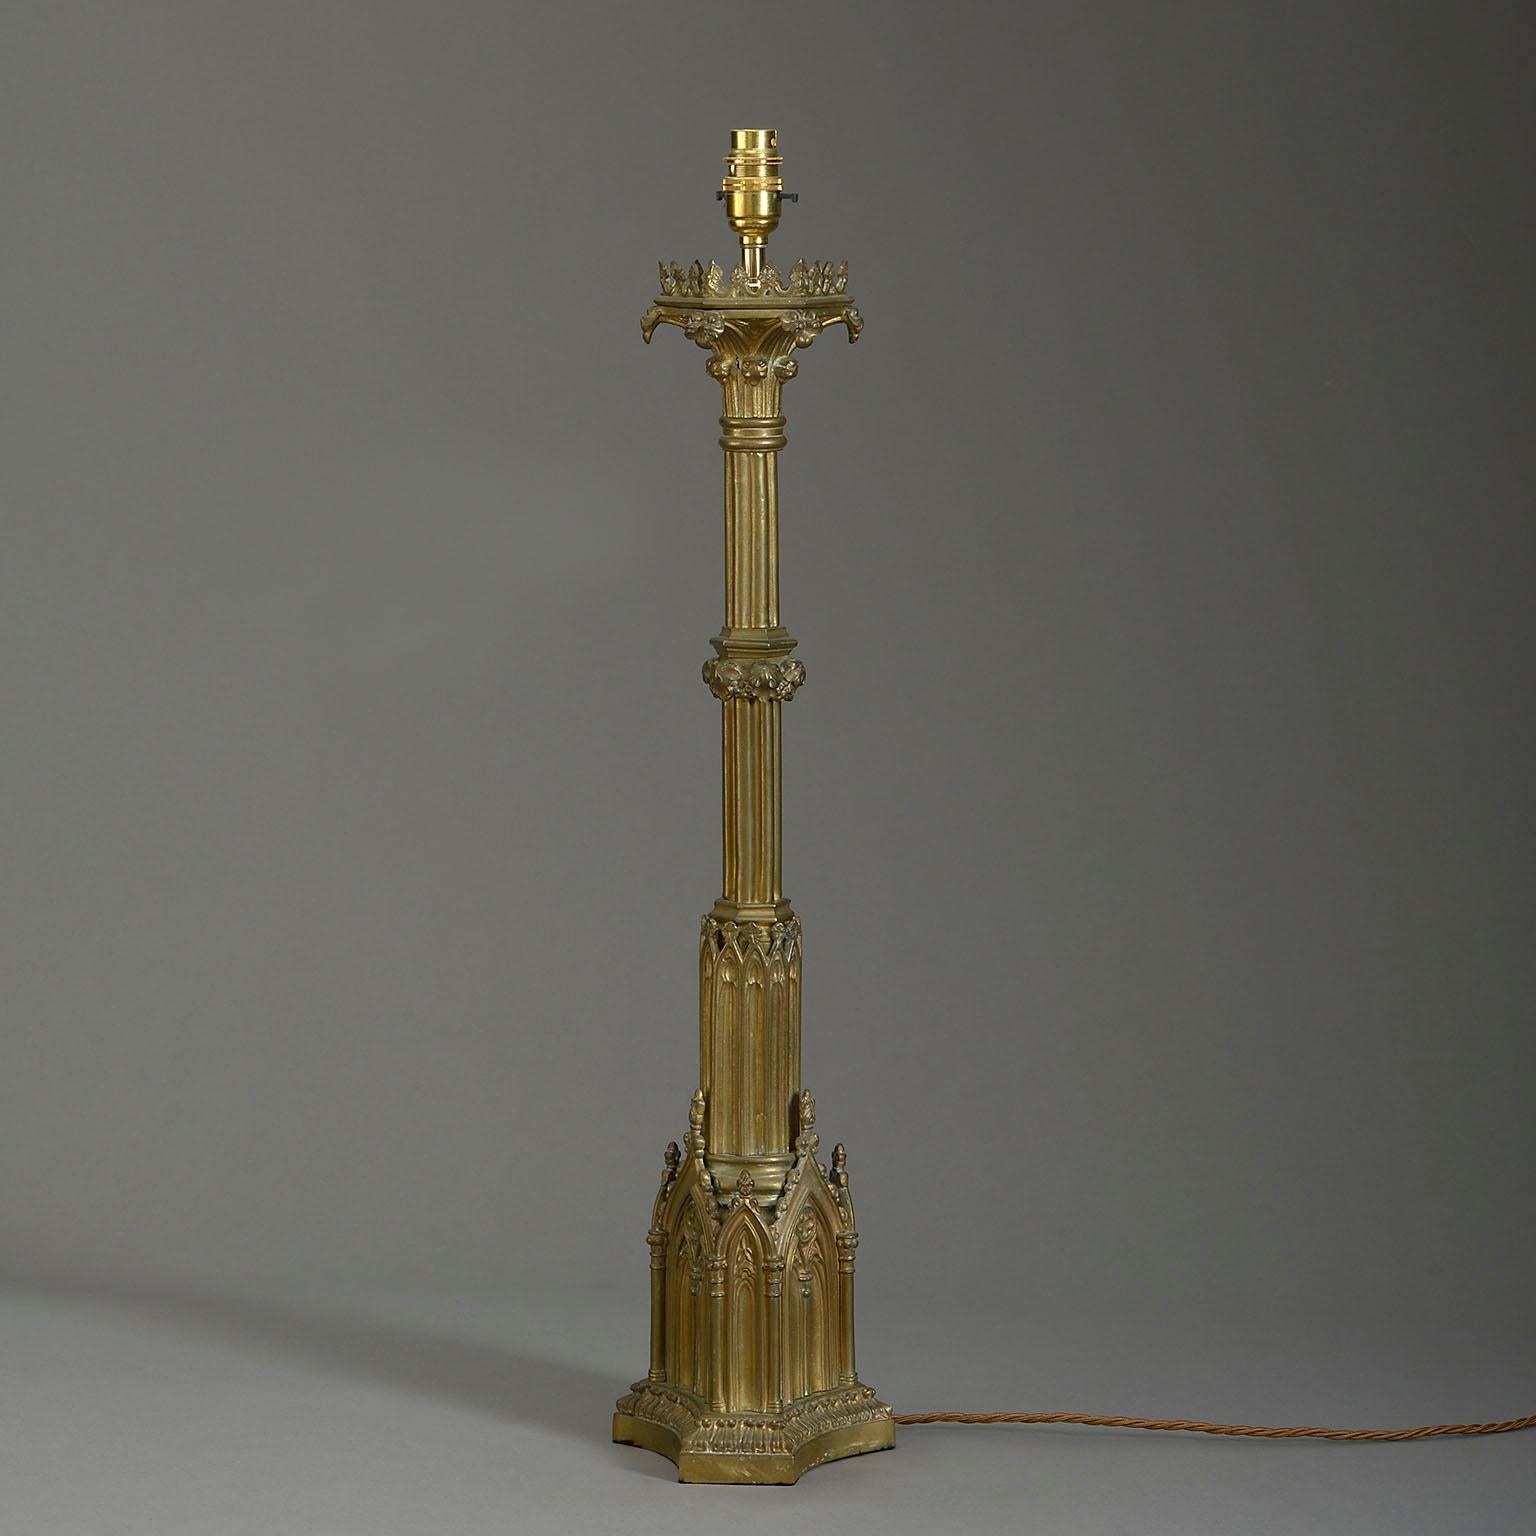 A late nineteenth century brass column lamp in the Gothic taste, the staged cluster column stem set upon a triform plinth base with blind tracery arches.

Dimensions refer to antique brass elements only.

Wired to UK Standards. This lamp can be